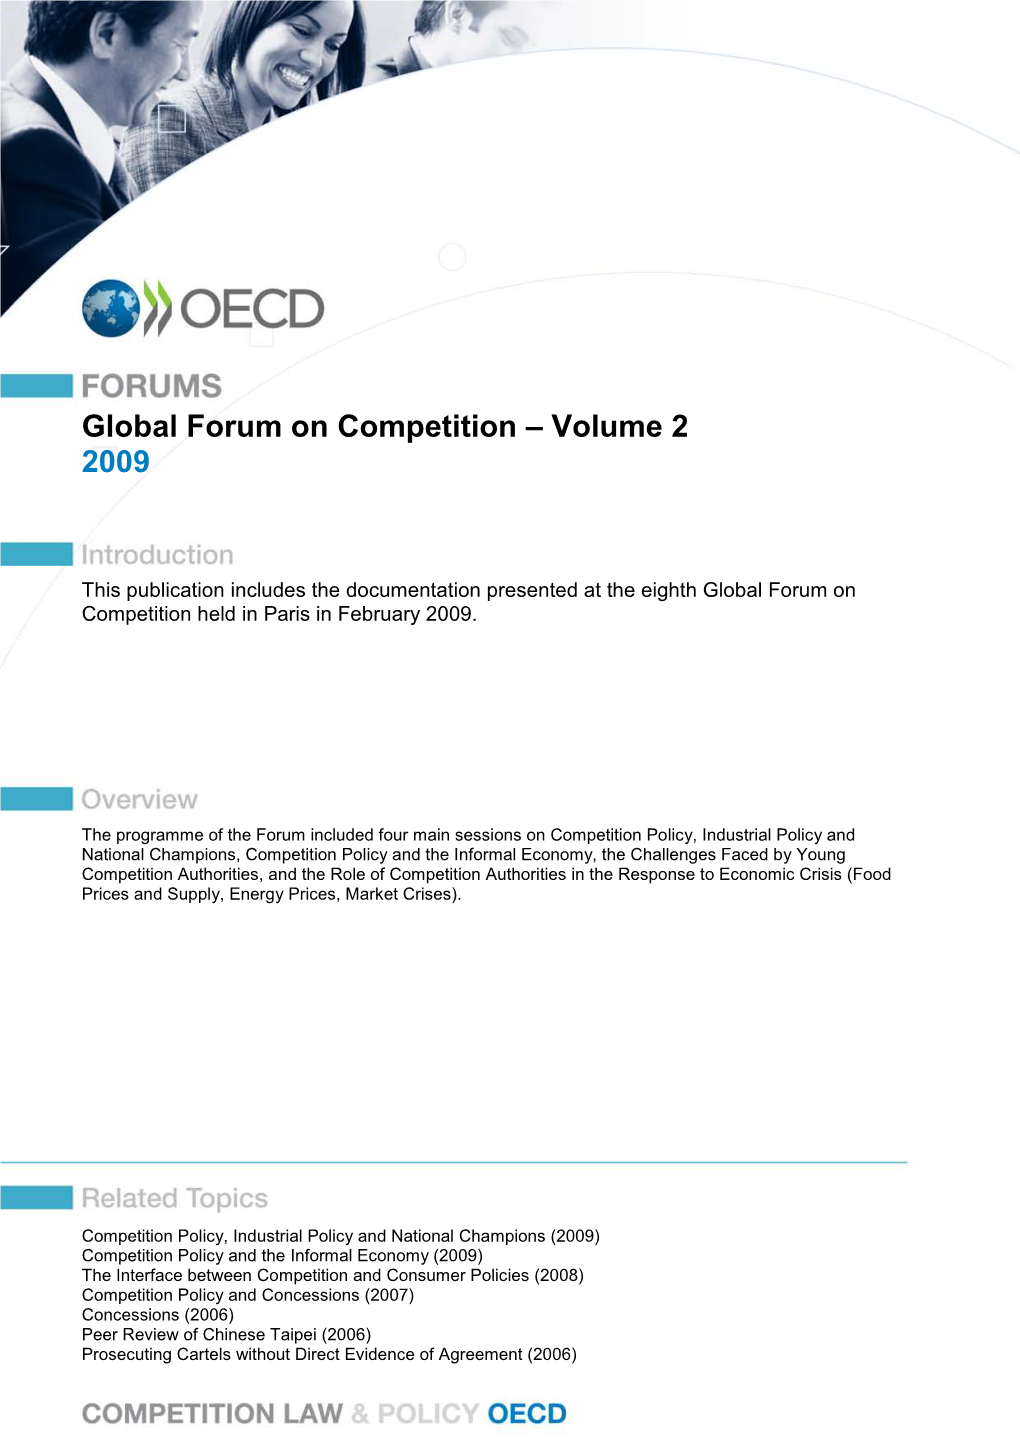 Global Forum on Competition 2009